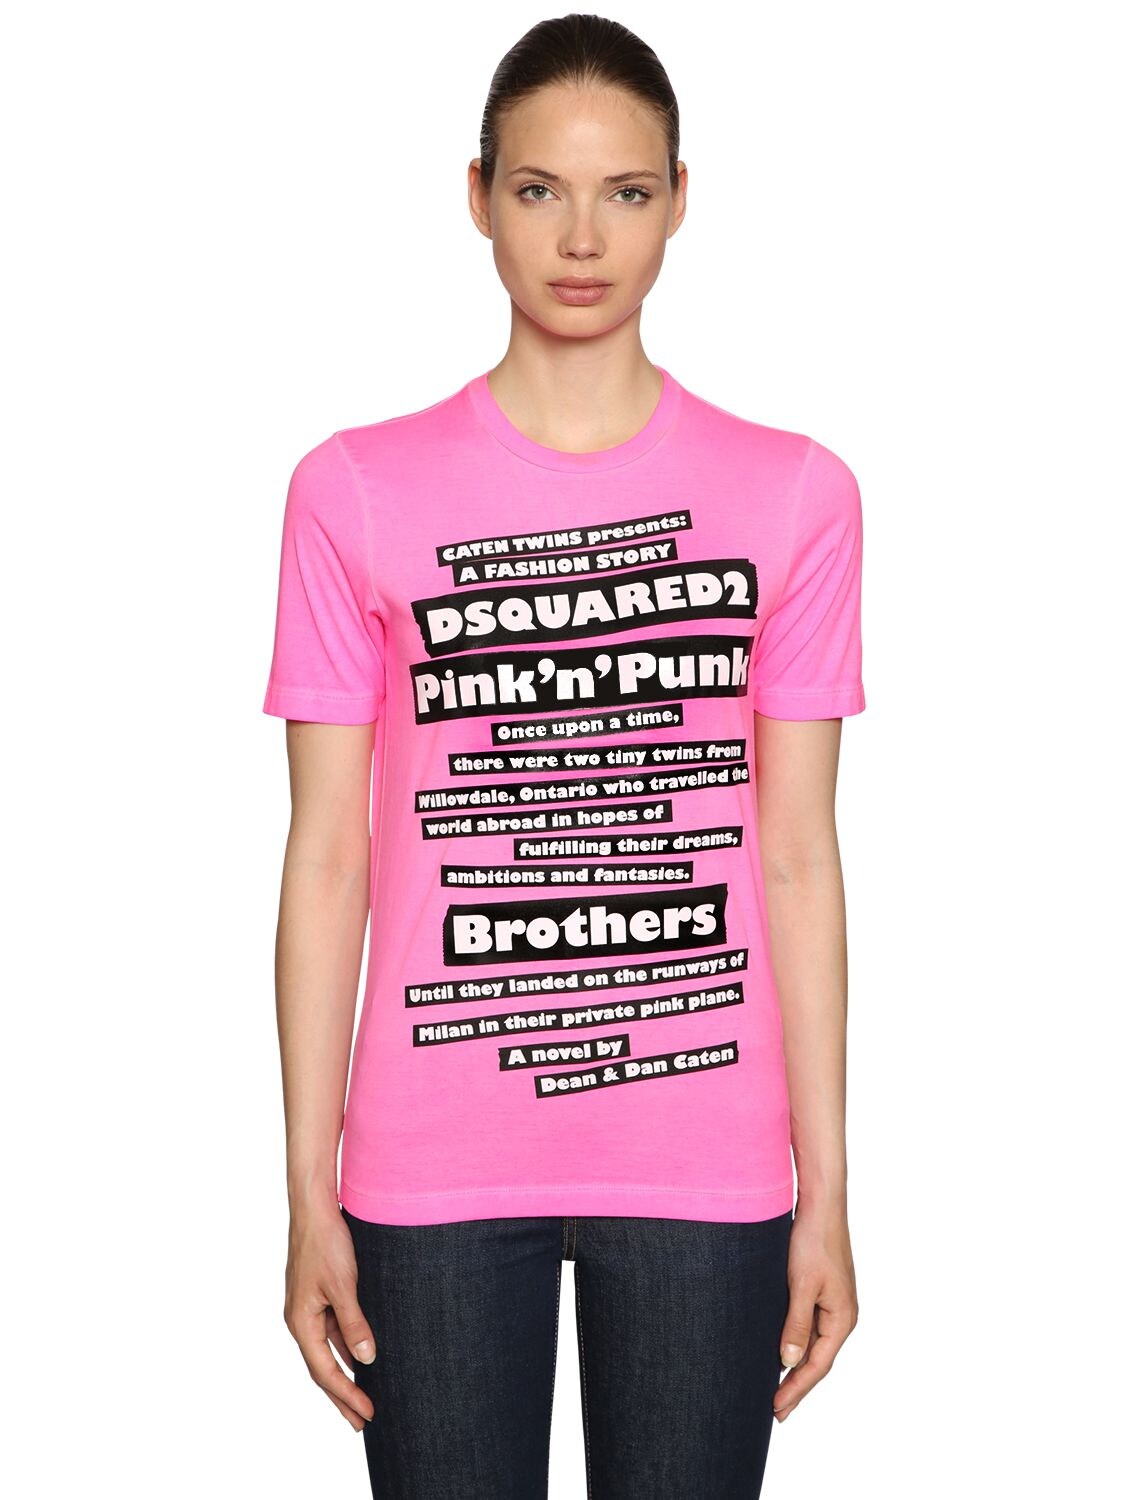 dsquared2 t shirt pink